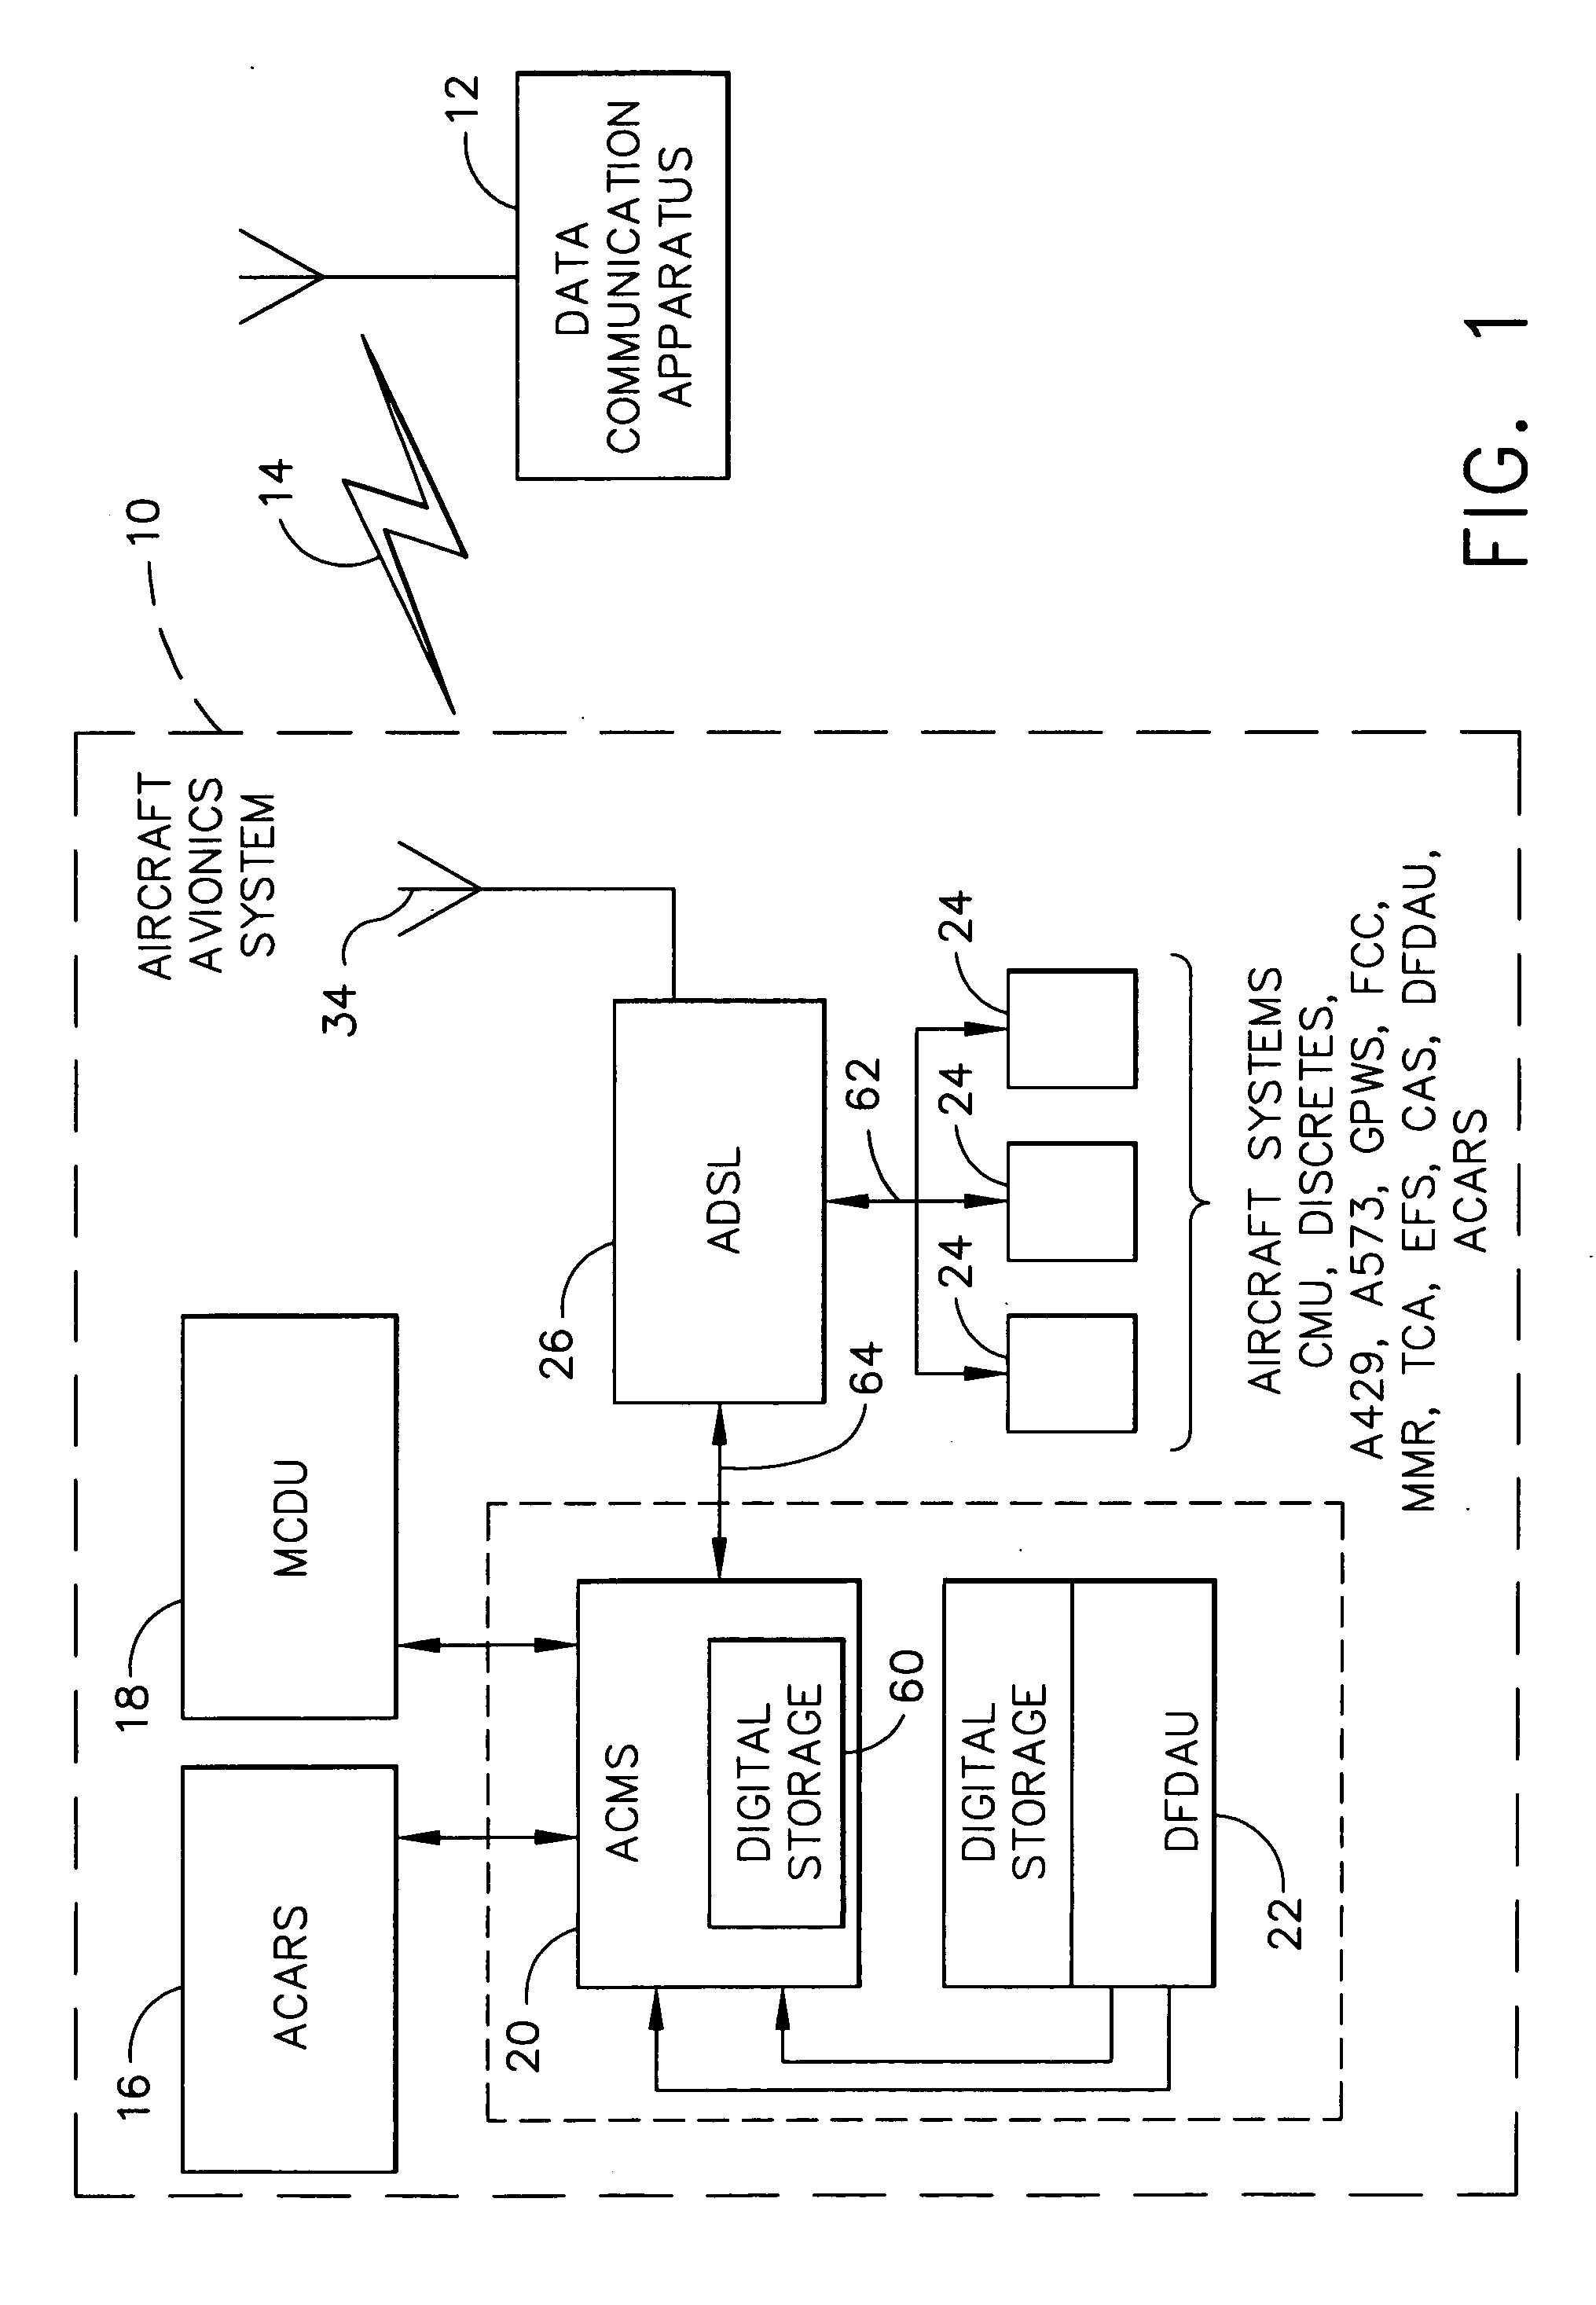 Methods and apparatus for wireless upload and download of aircraft data